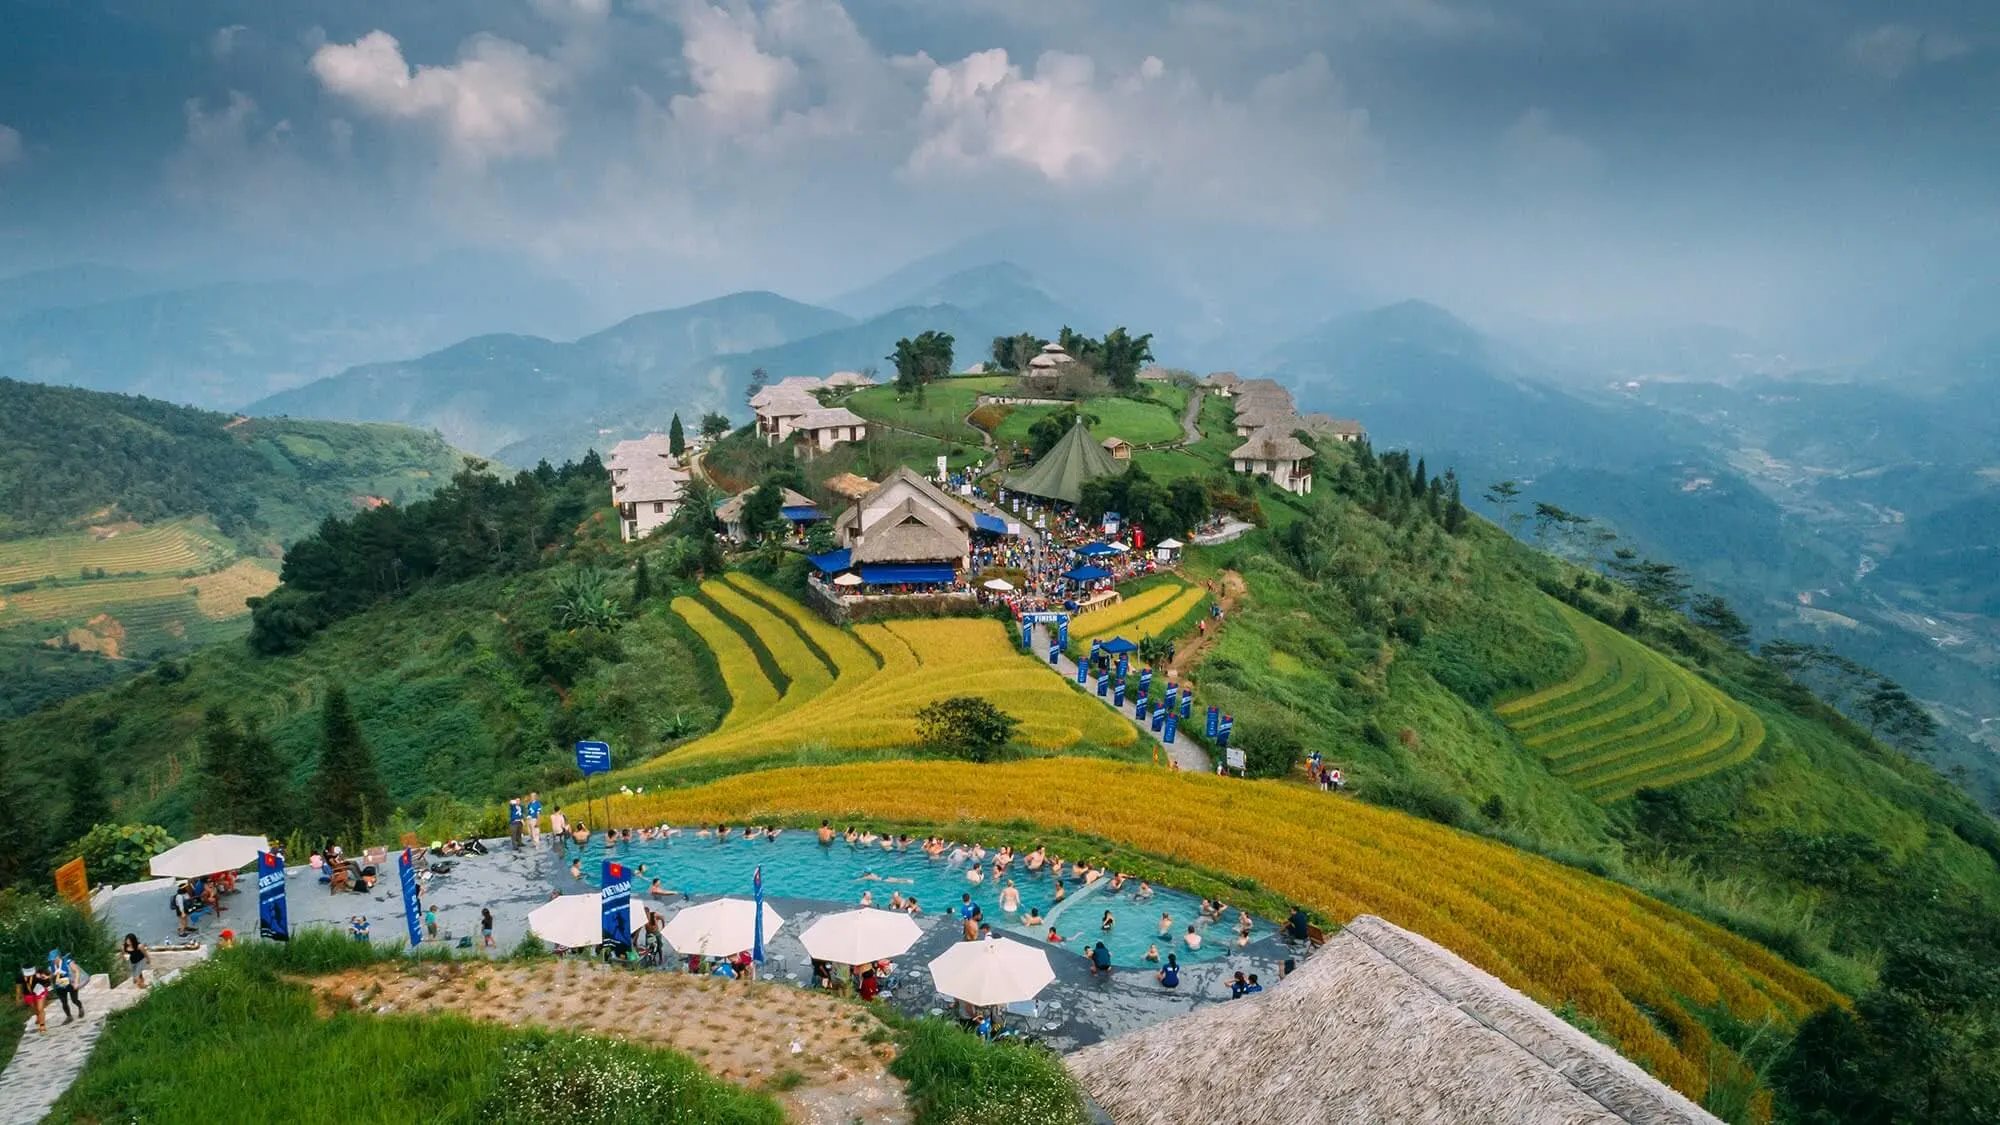 Unique places to stay in Vietnam